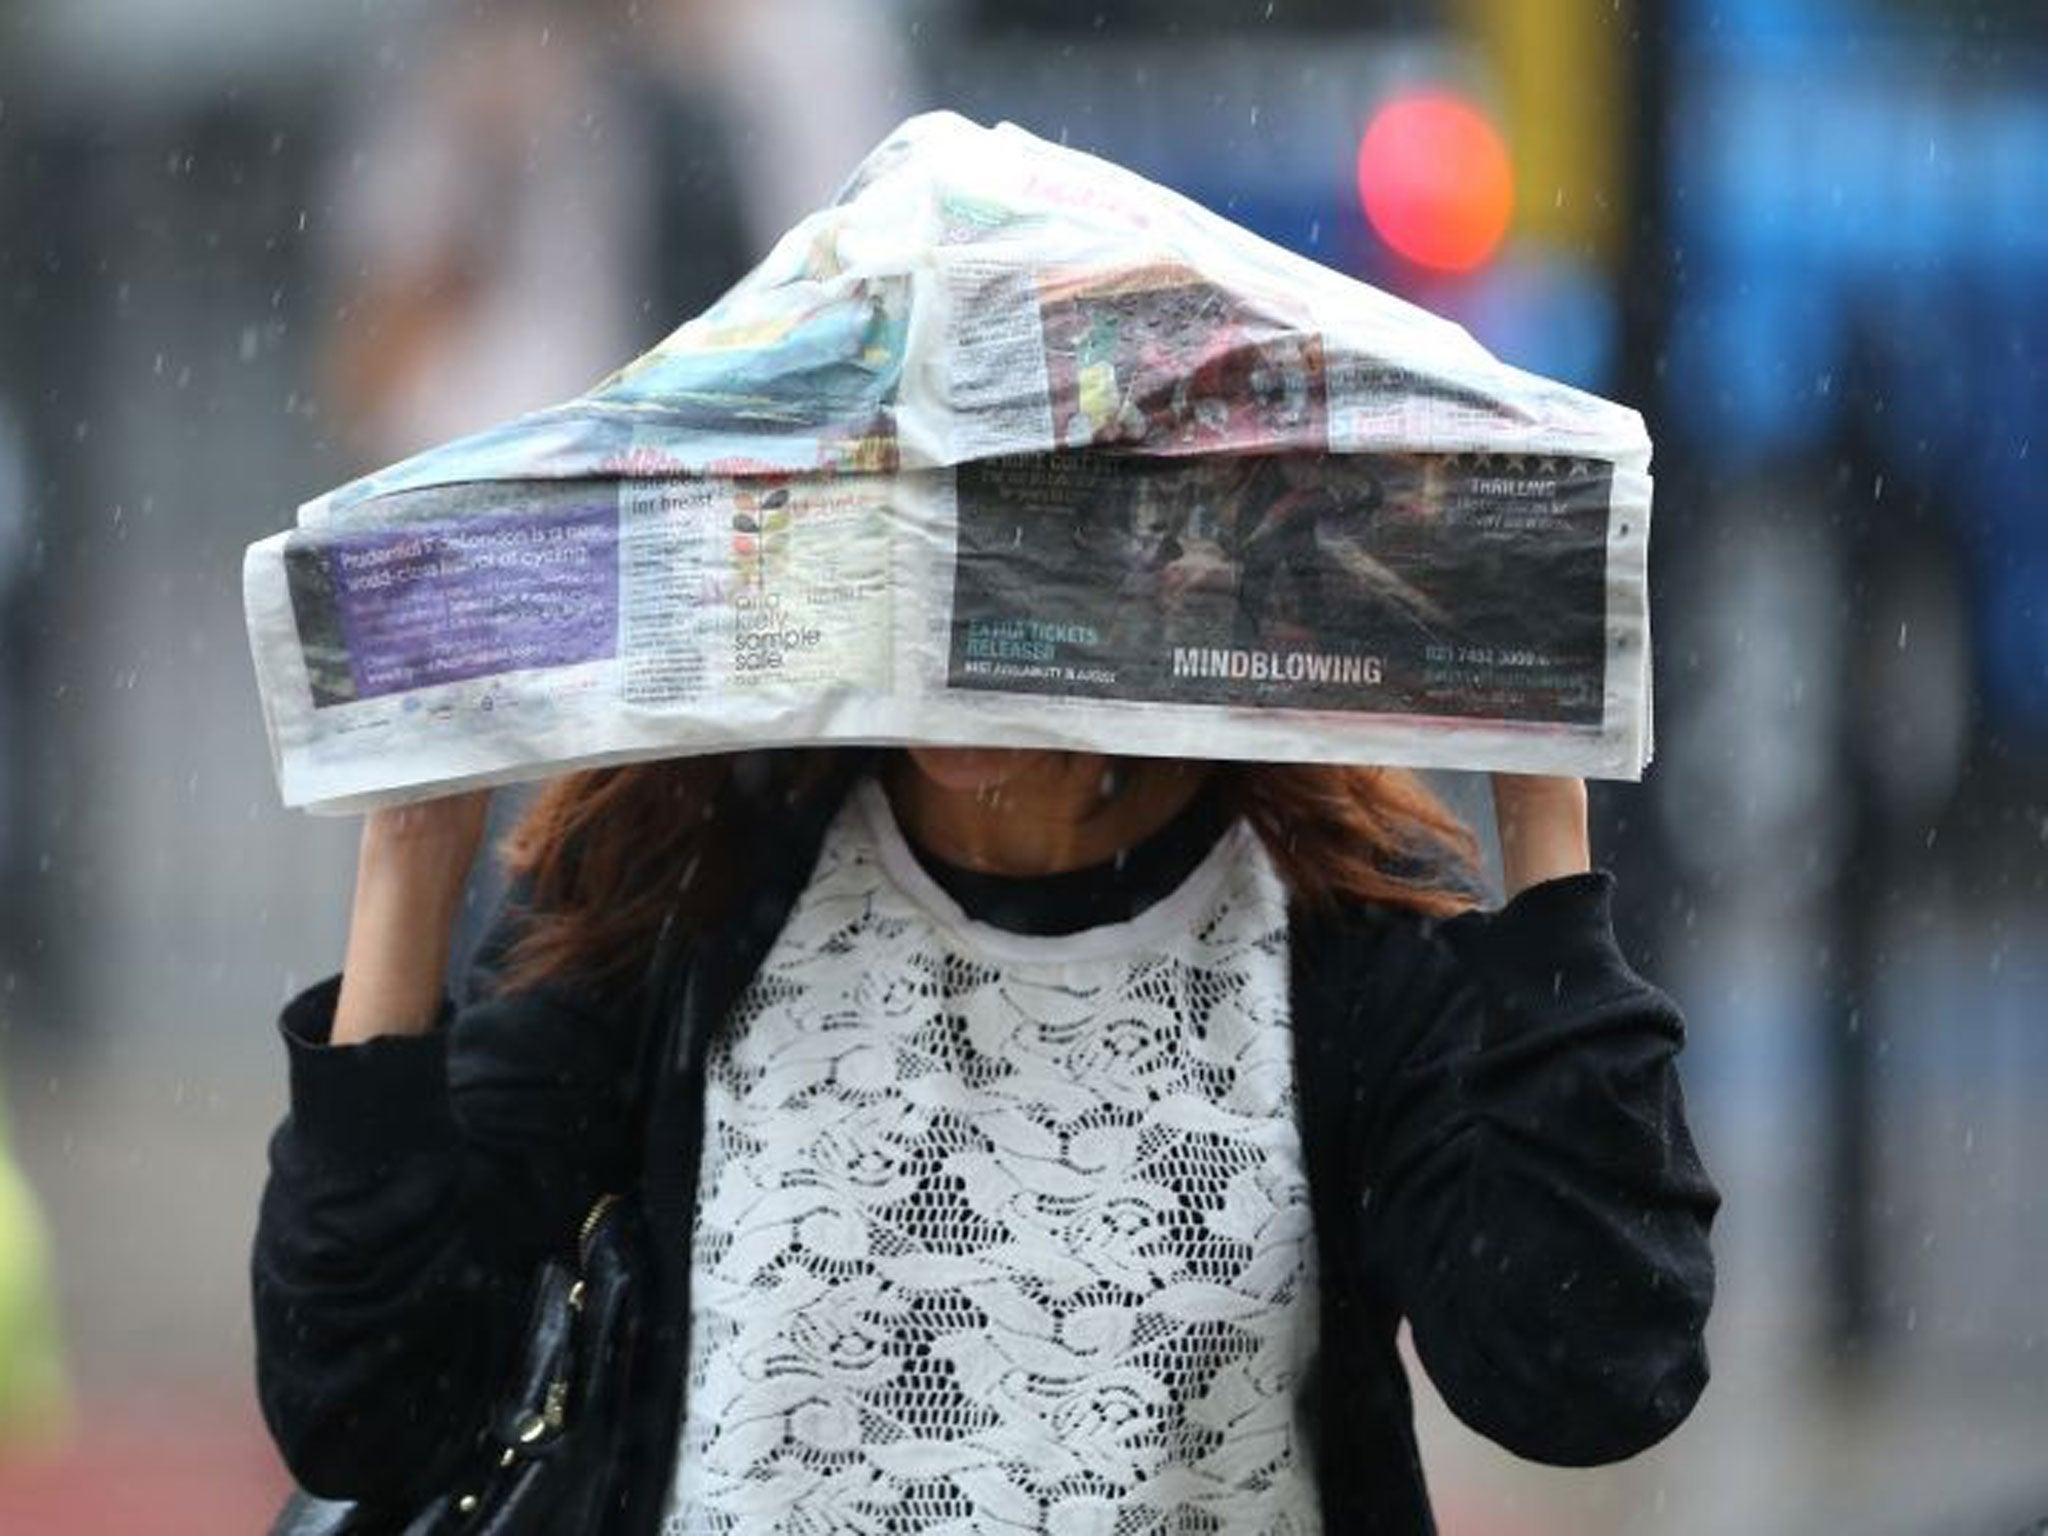 It never rains but it pours: Britain could face a wetter climate over the next few days